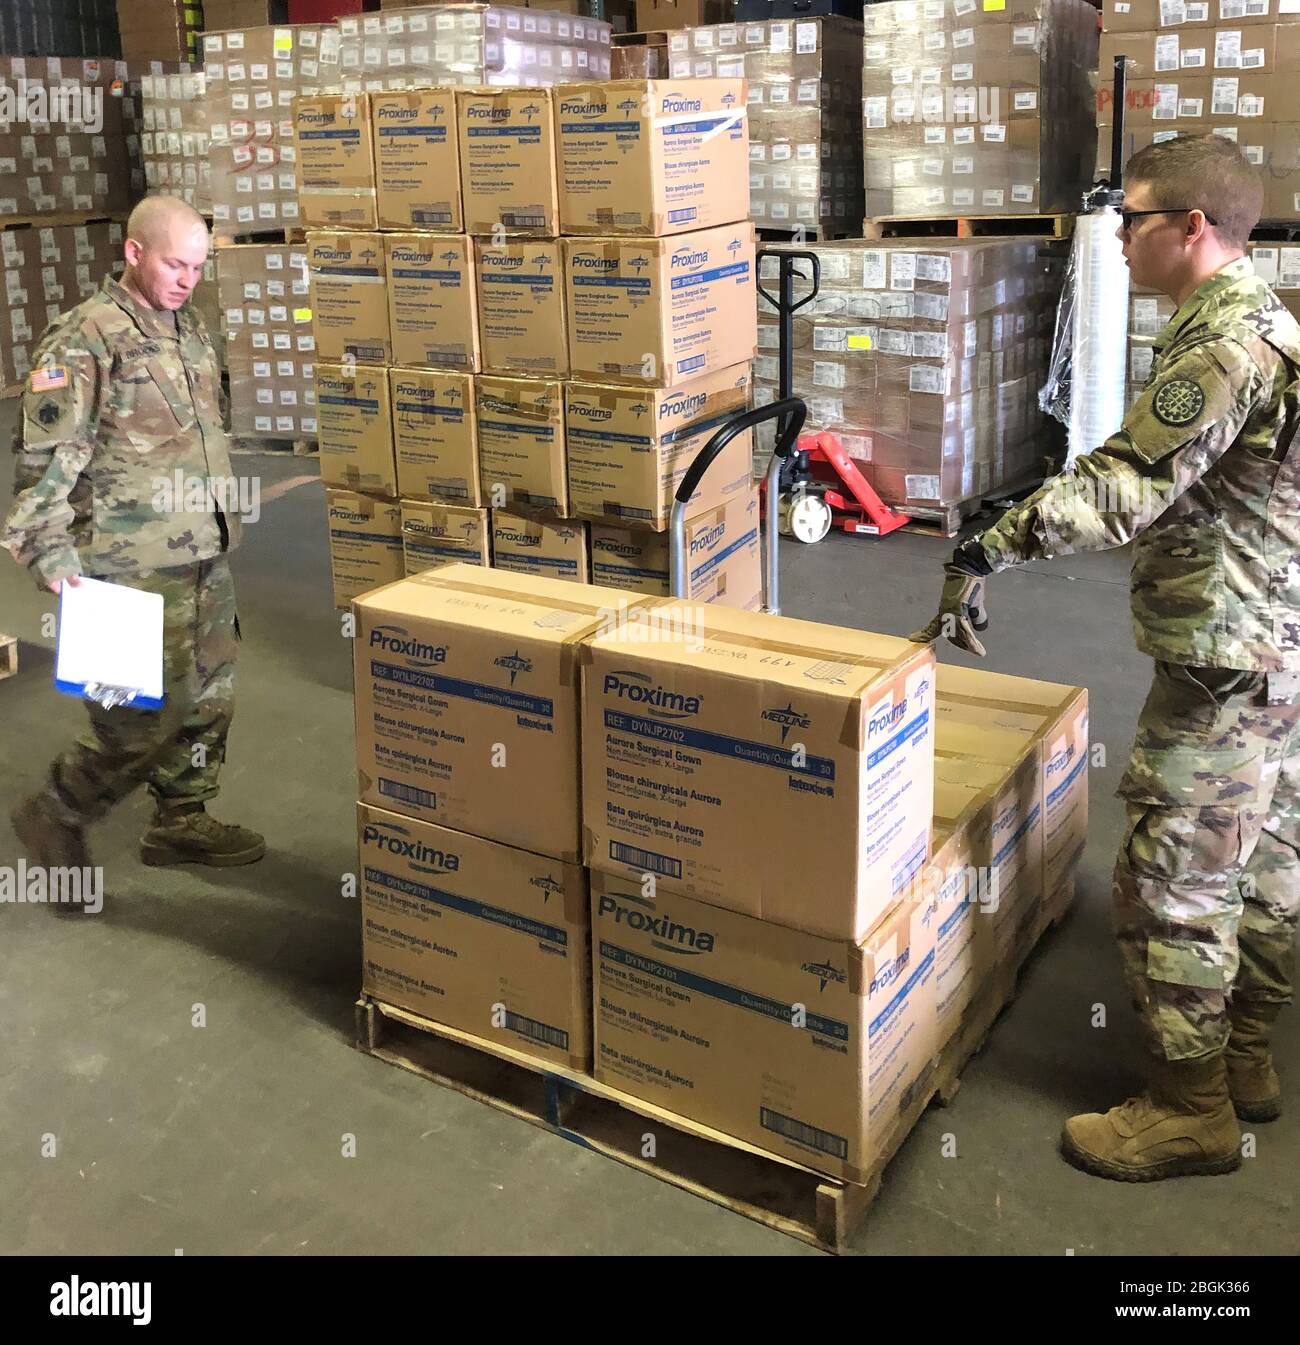 Soldiers from the Michigan National Guard assist Michigan Department of Health and Human Services with assembling and loading critical personal protective gear, such as gloves, gowns, and face shields, March 18, 2020. Once packaged, MDHHS will deliver the supplies to various local public health departments. (U.S. National Guard photo by Sgt. James Bennett) Stock Photo